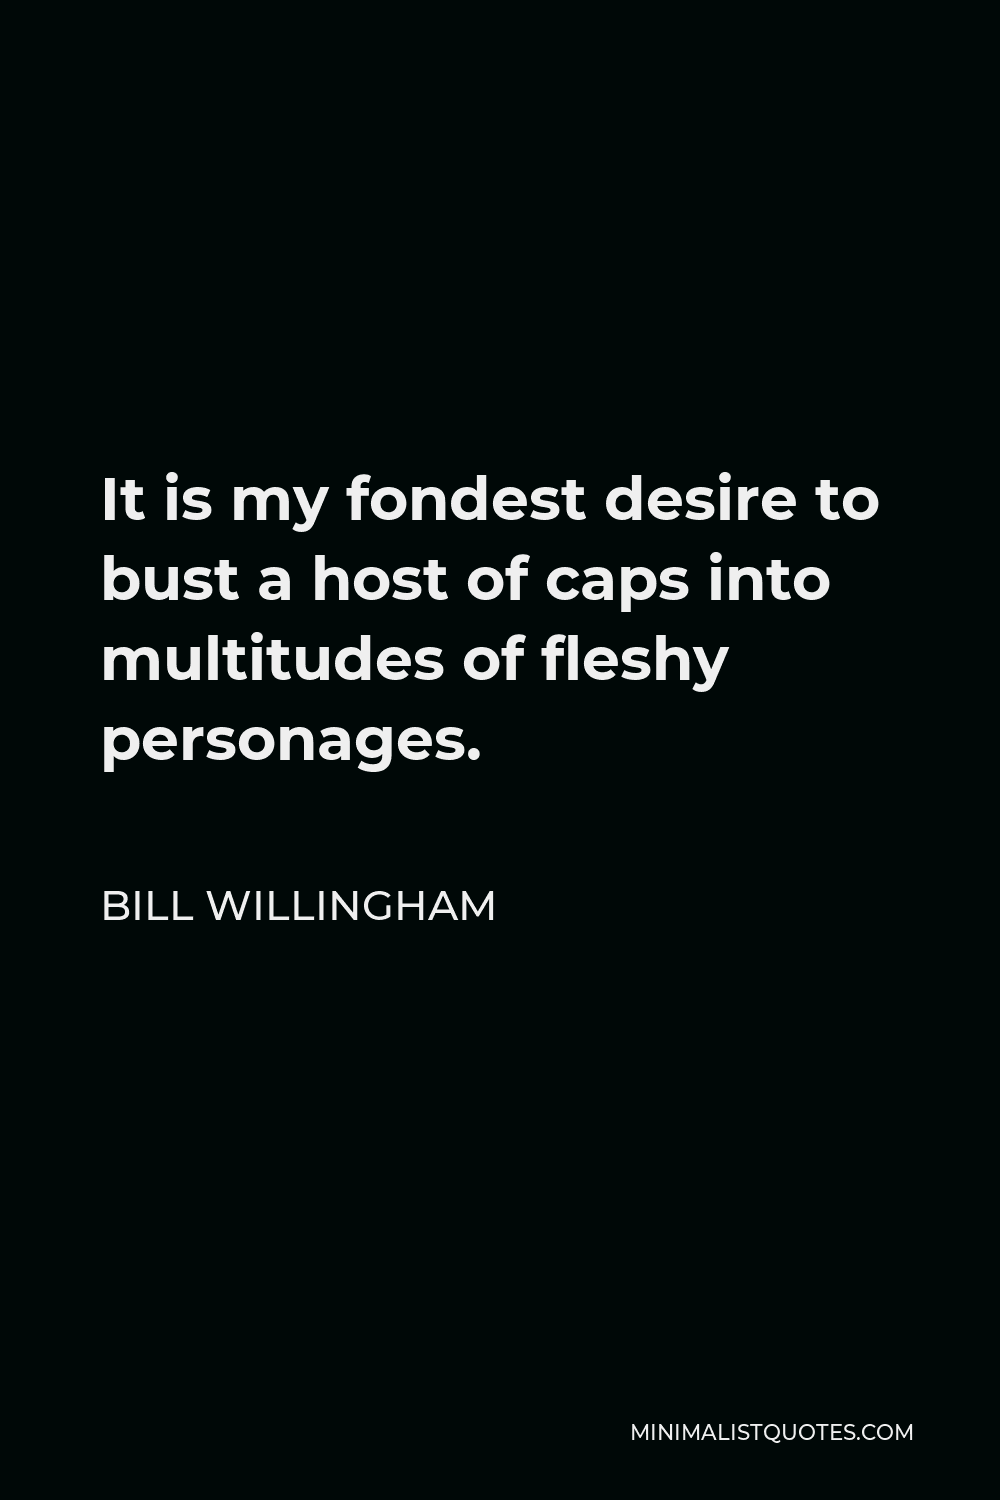 Bill Willingham Quote - It is my fondest desire to bust a host of caps into multitudes of fleshy personages.